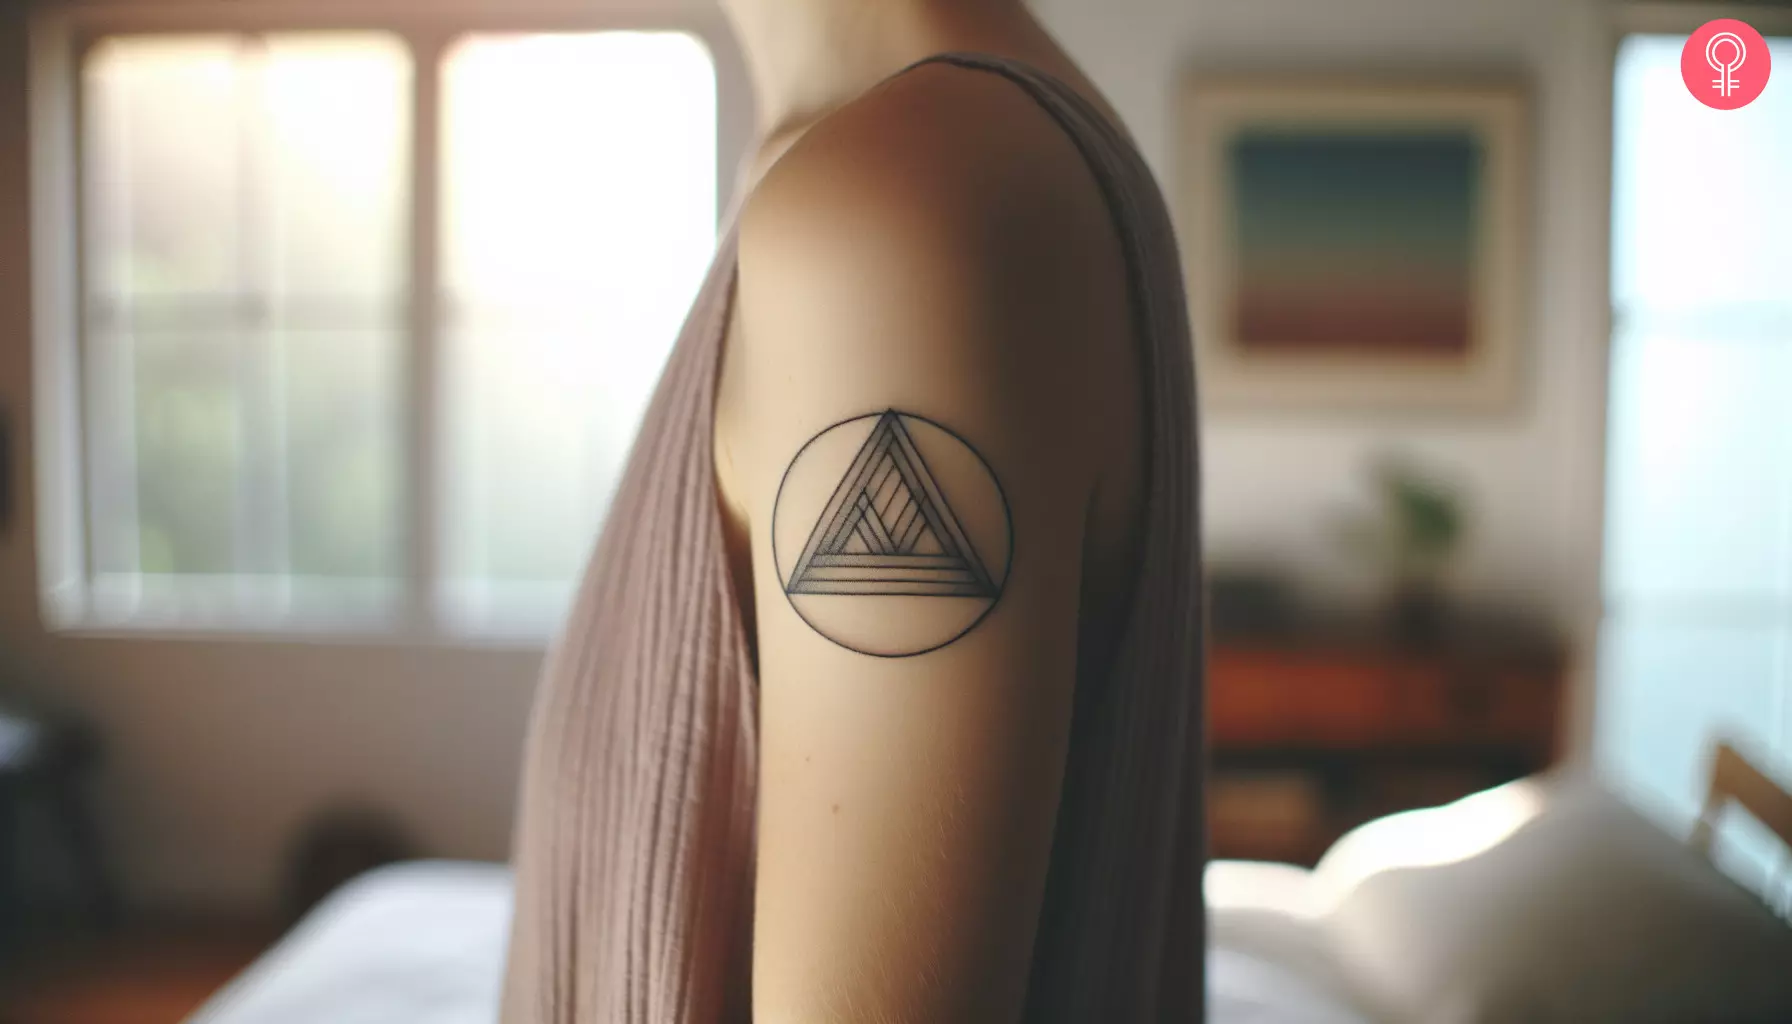 A woman with an inscribed triangle tattoo on her upper arm